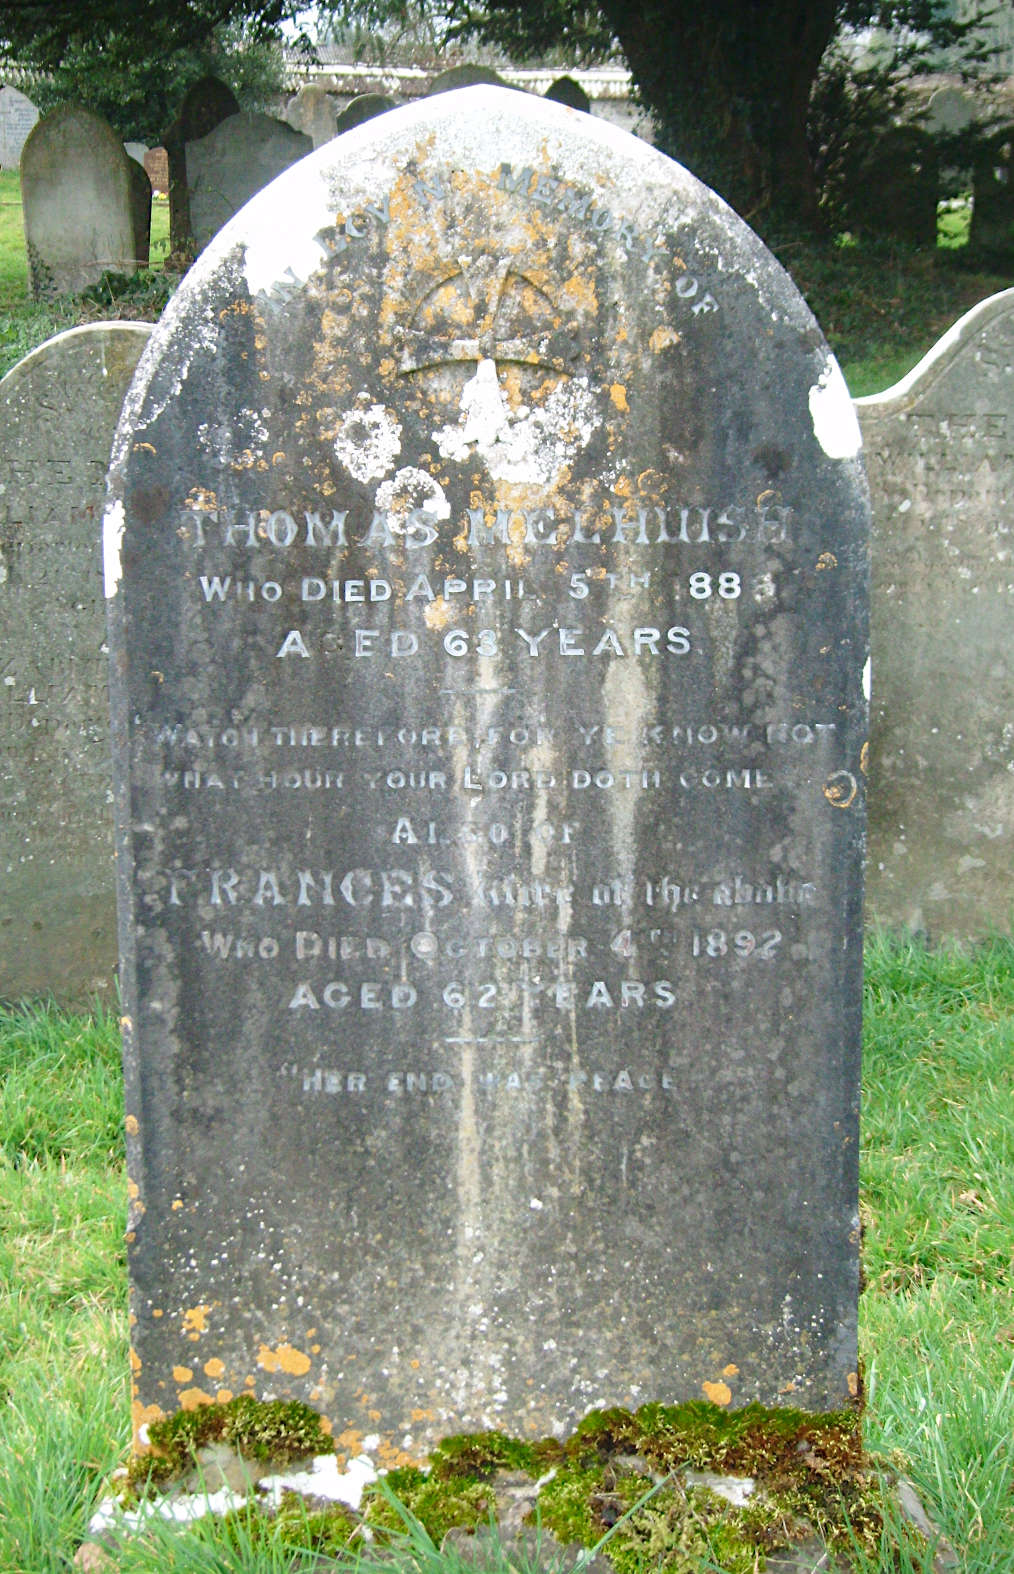 /photos/Grave of Thomas and Frances Melhuish